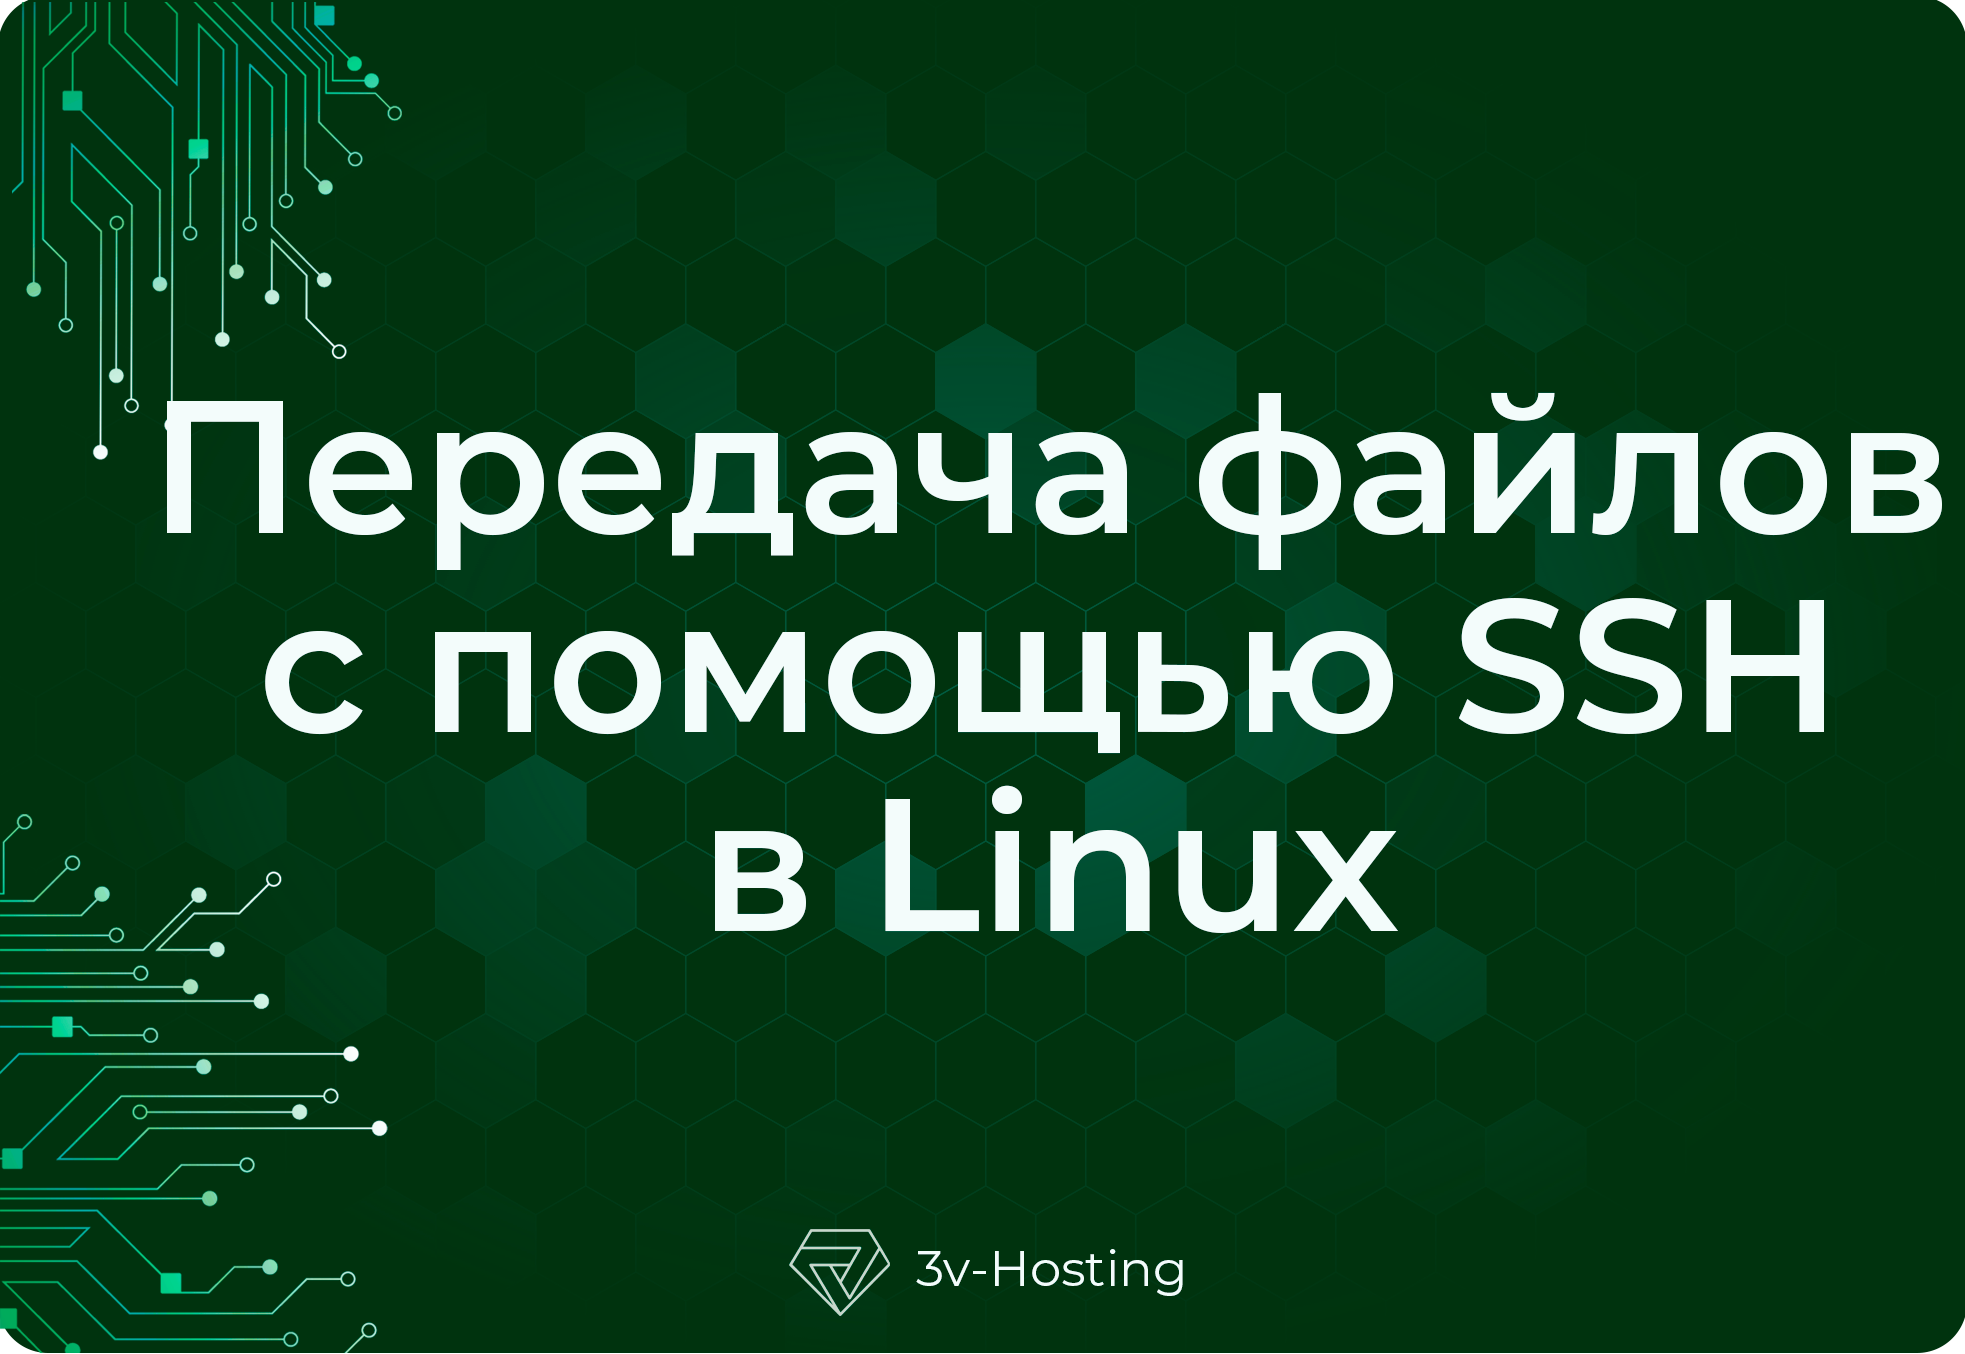 Transferring files using SSH in Linux